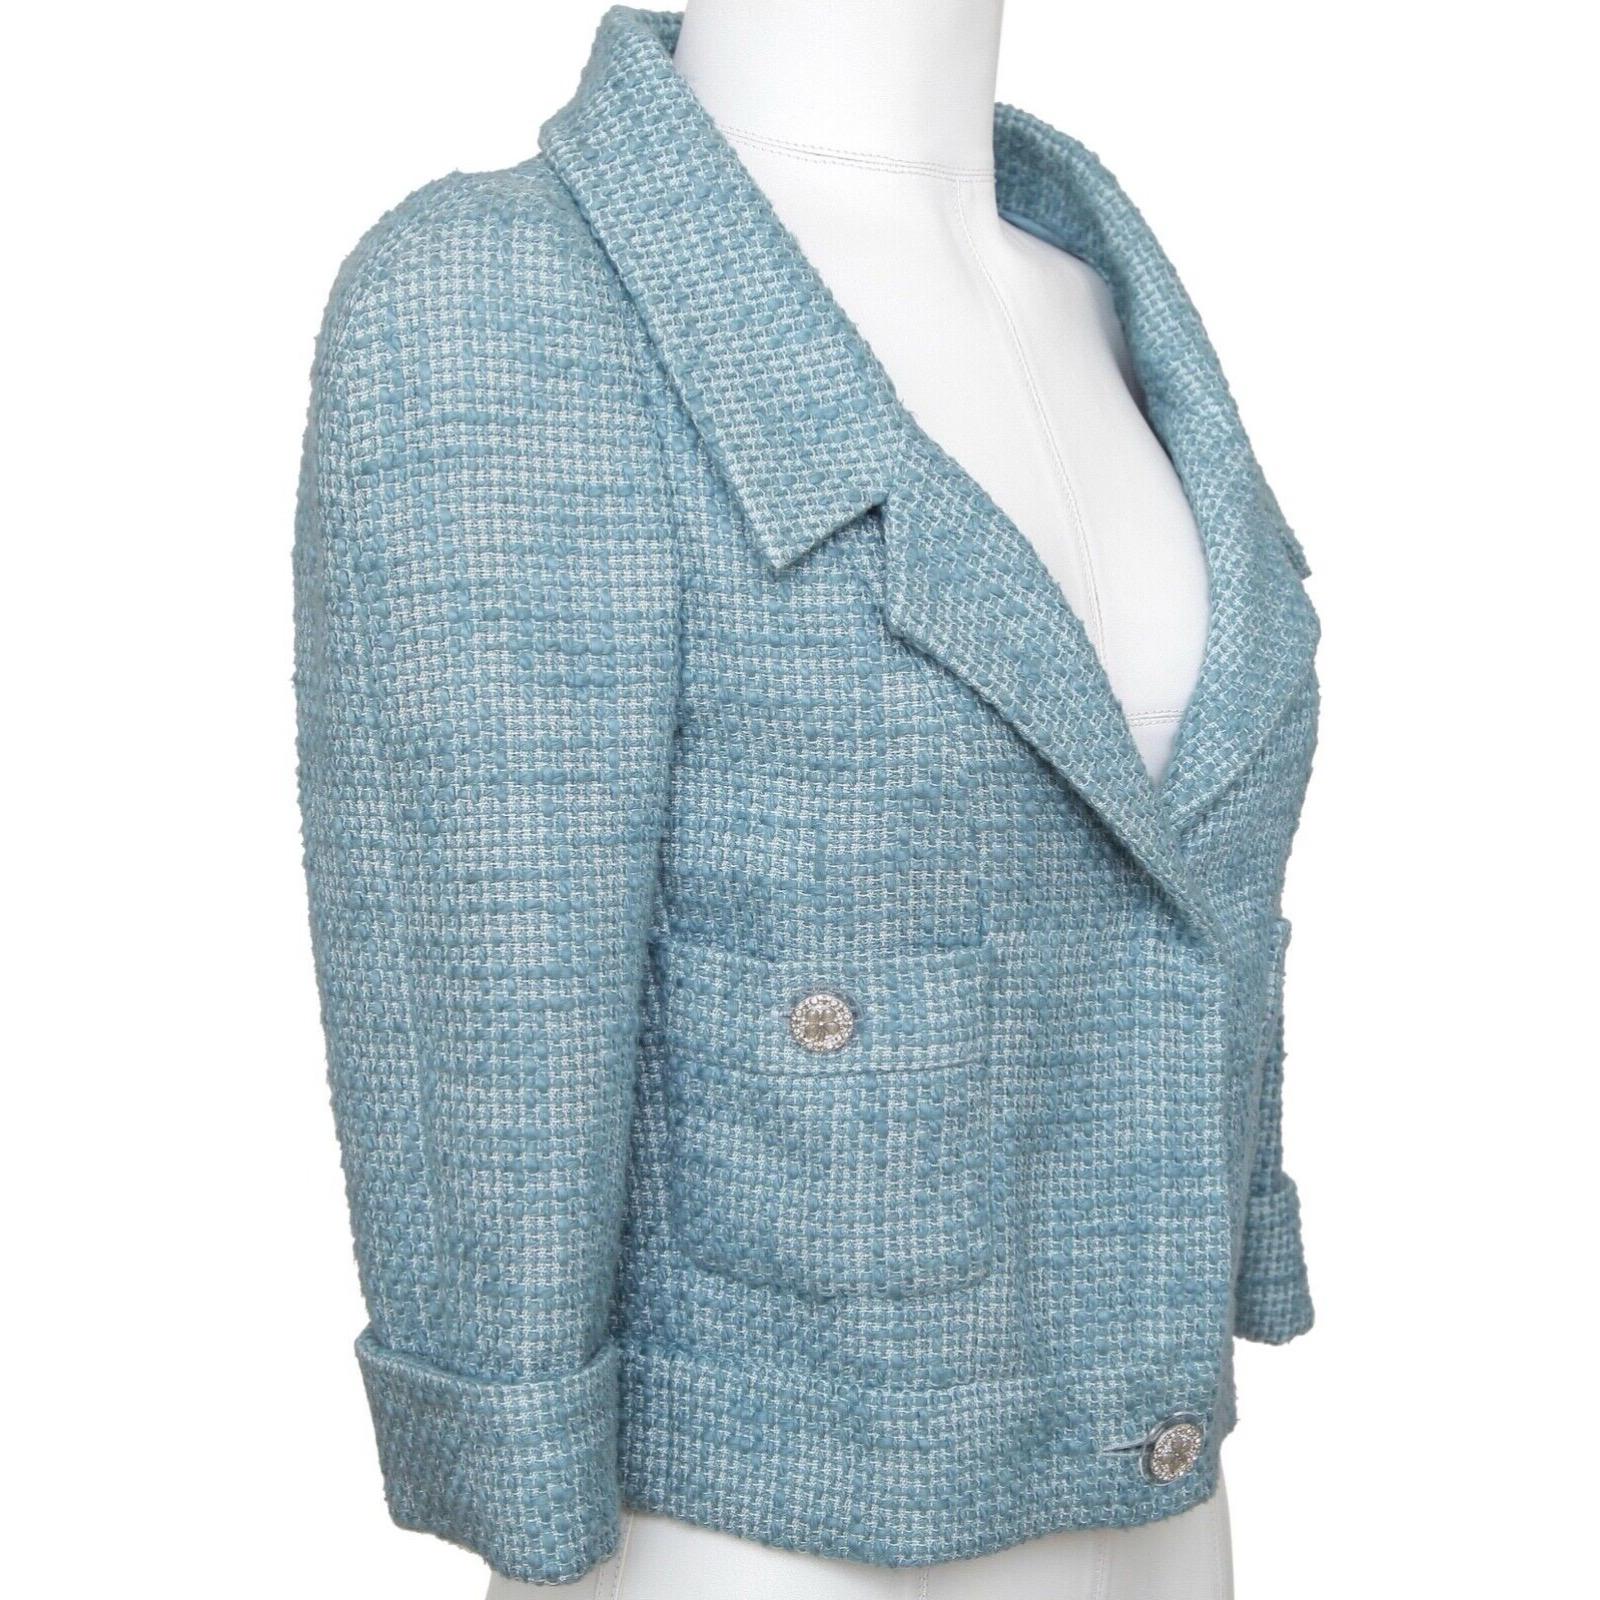 GUARANTEED AUTHENTIC CHANEL CRUISE 2013 CROPPED BLUE TWEED JACKET


Design:
- Cropped lightweight tweed jacket in a fresh blue color.
- Notched lapel.
- Dual patch pockets.
- Strass crystal and celadon buttons.
- Concealed front zipper closure.
-